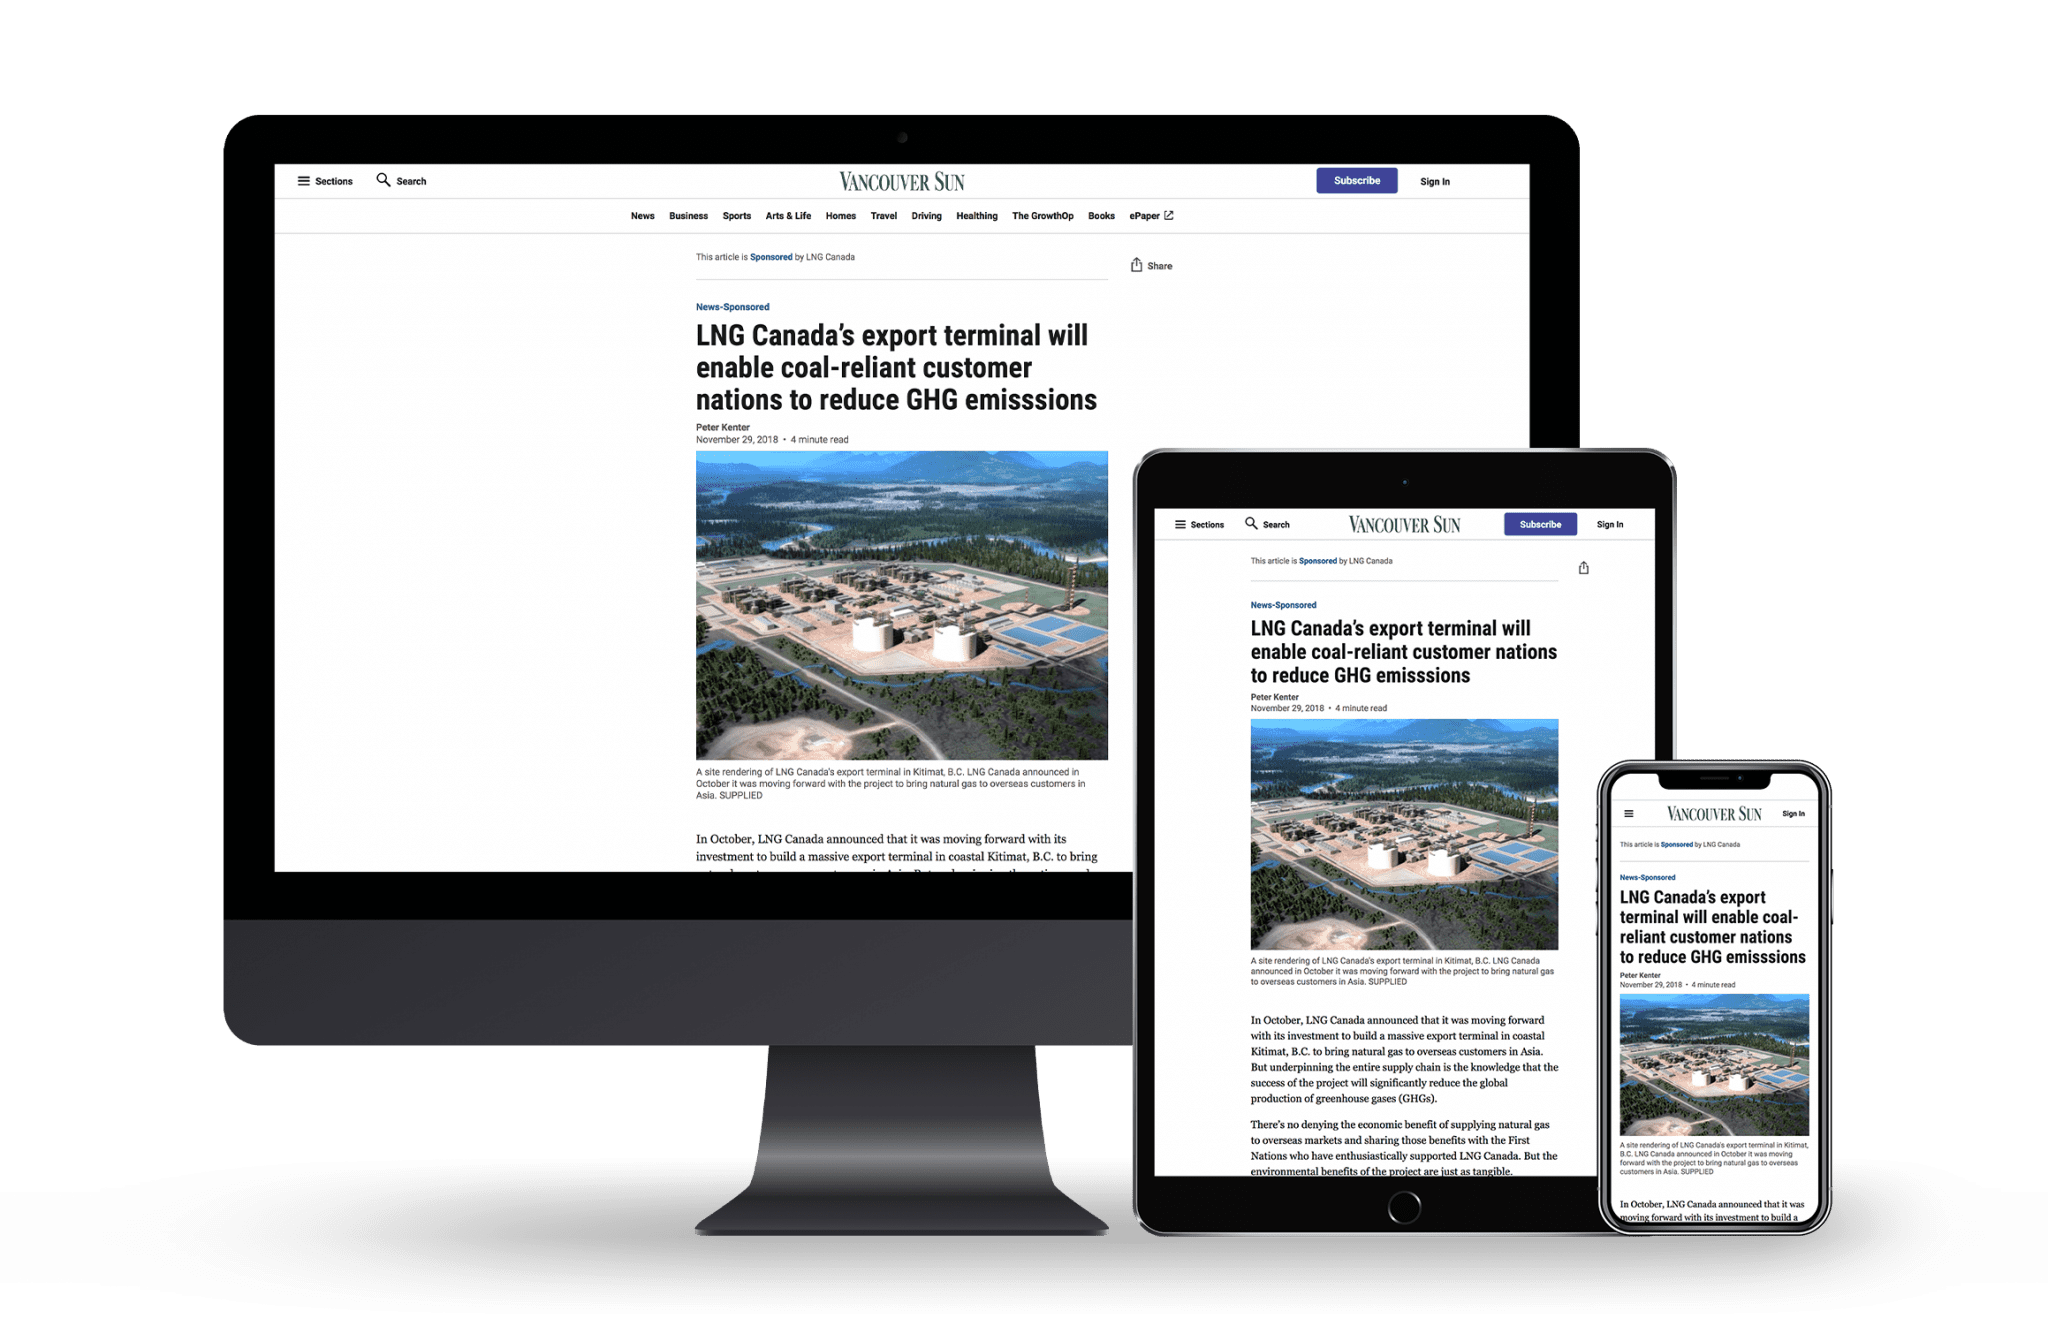 LNG Canada sponsored content shown on multiple devices